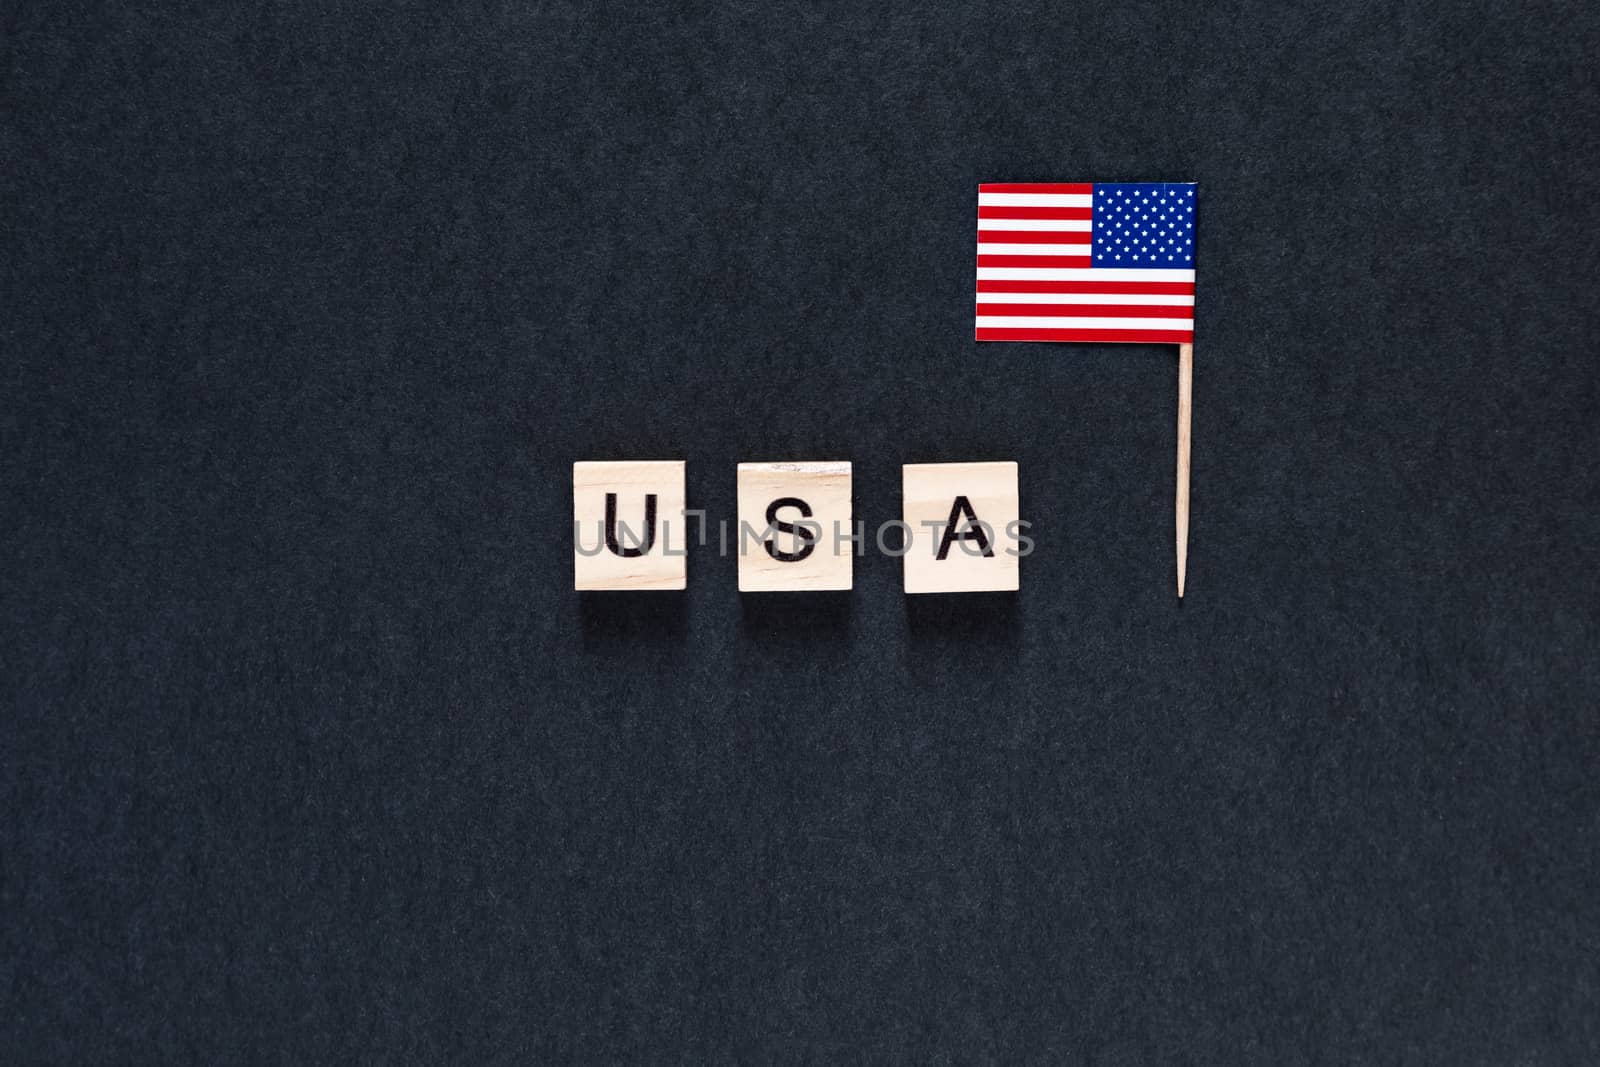 USA, America lettering on a black background by Pirlik